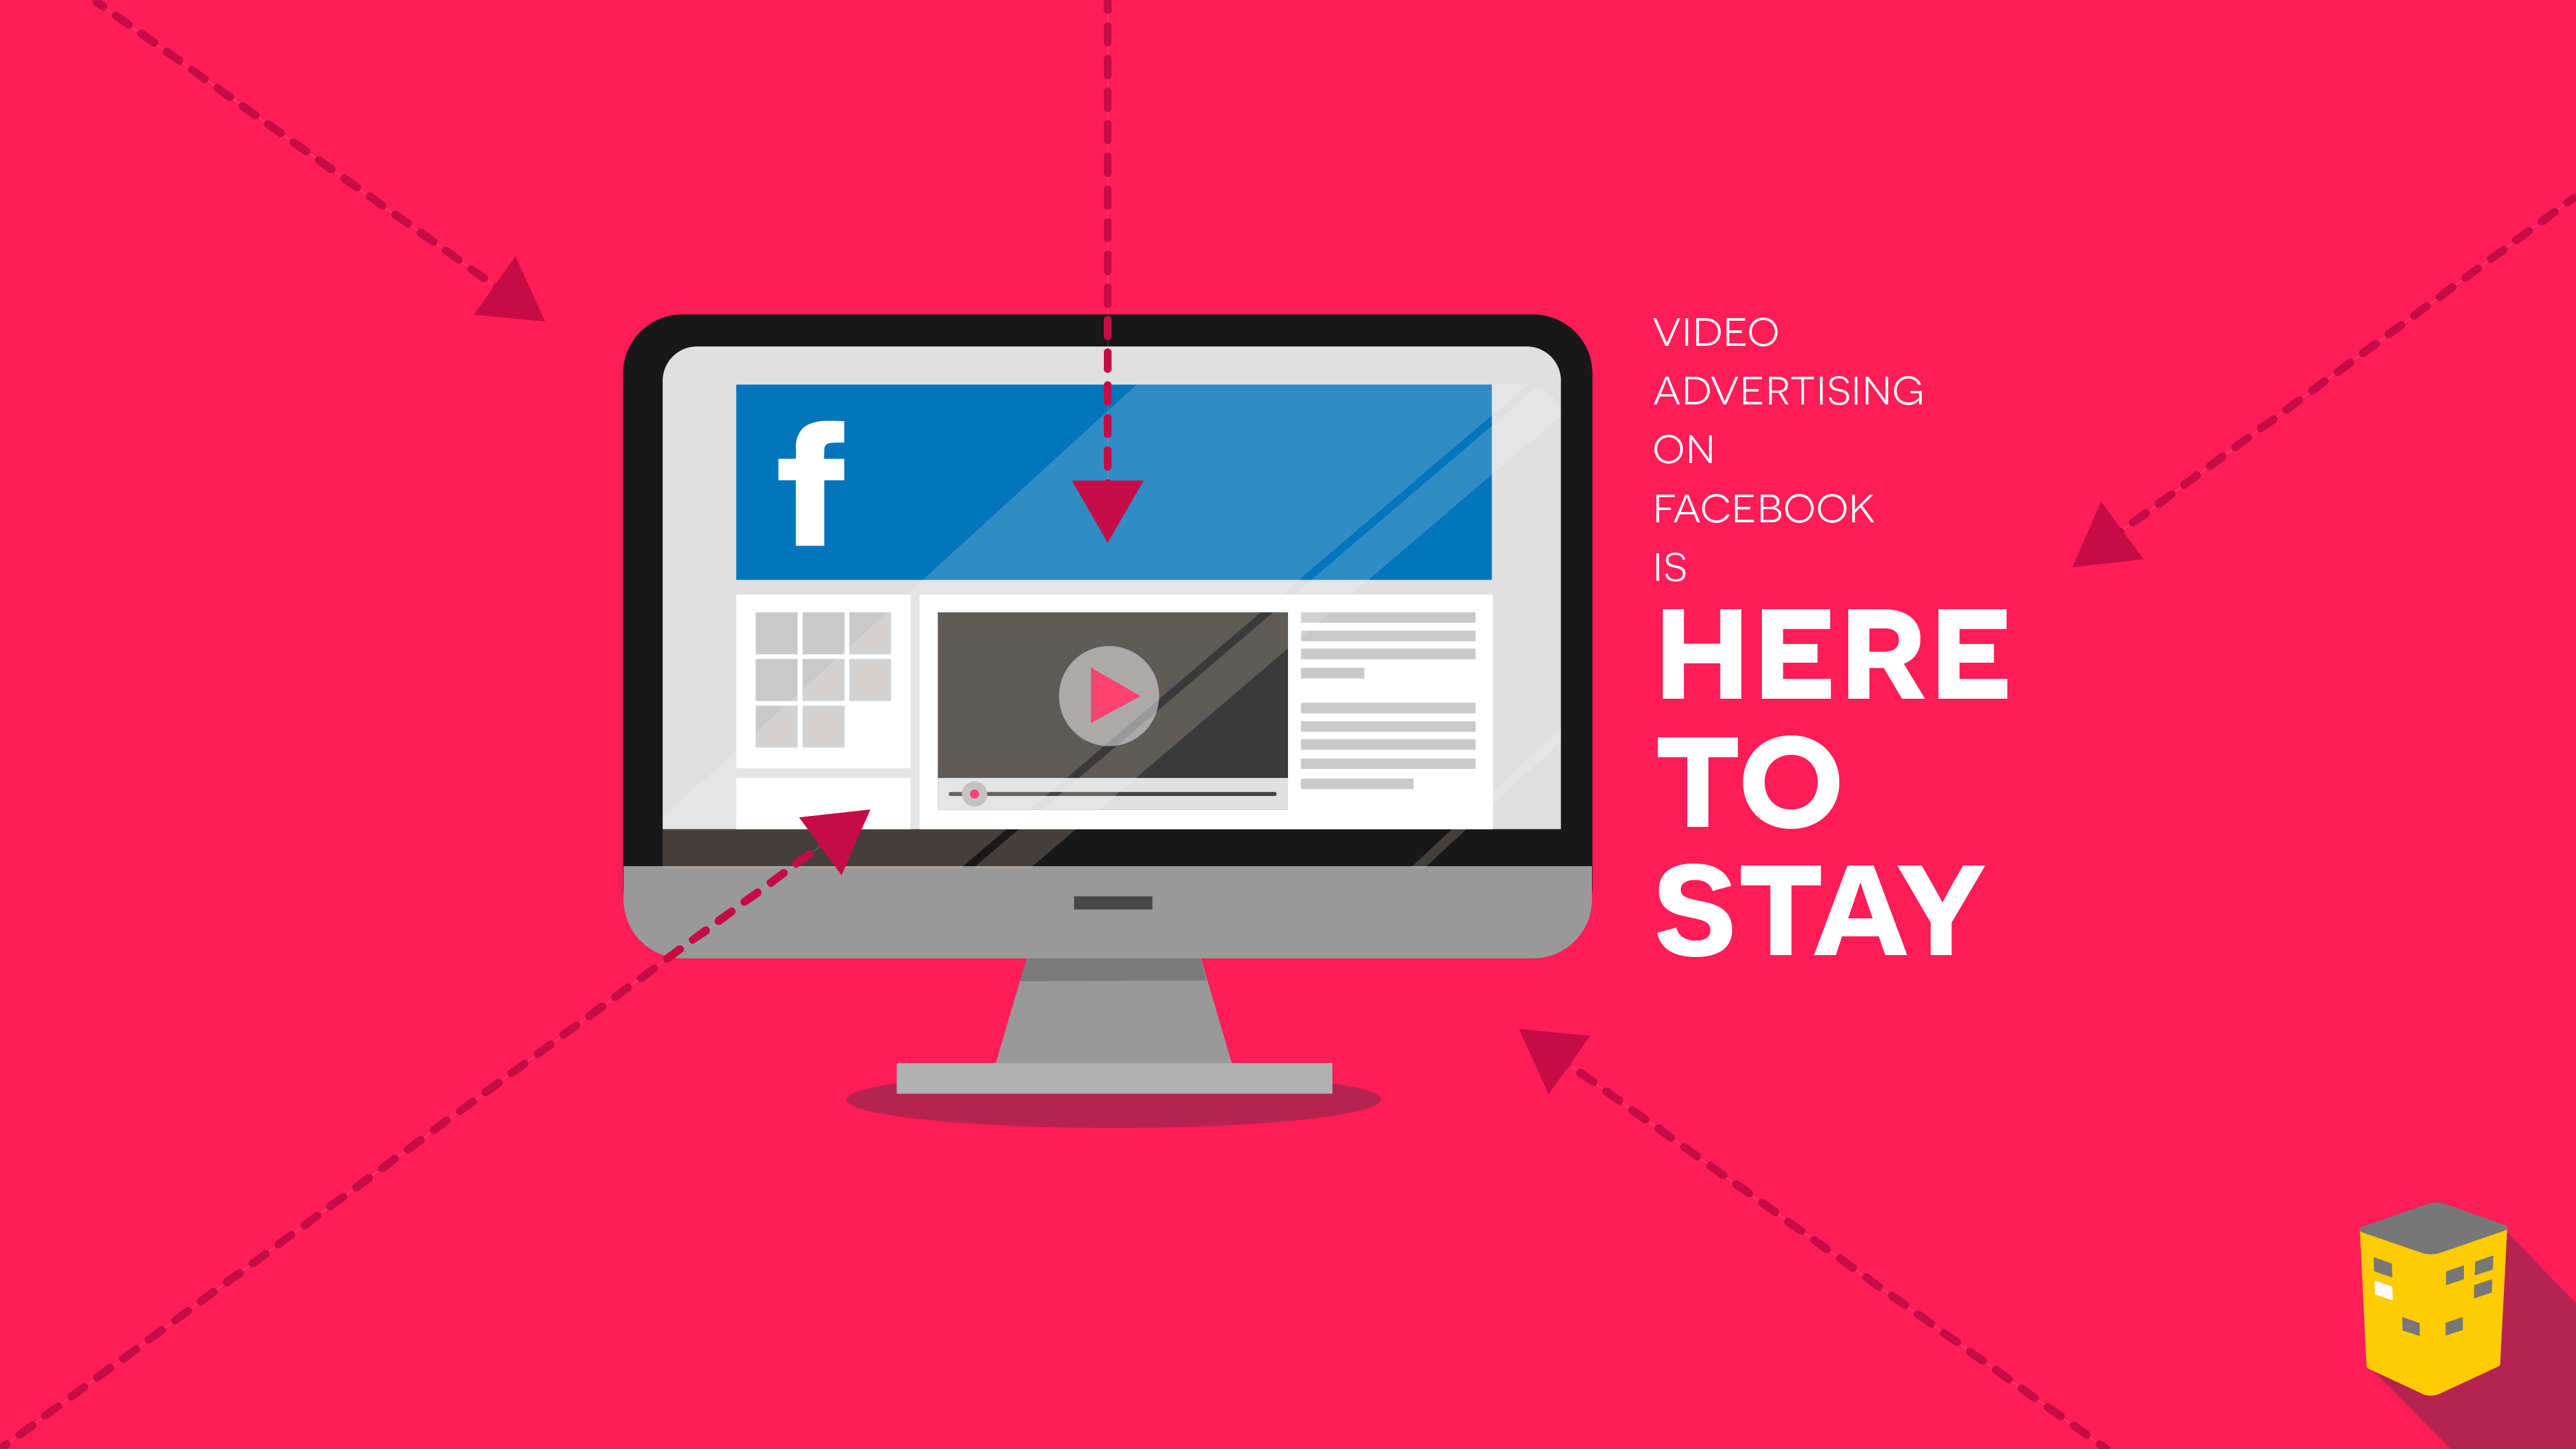 Why Video Advertising on Facebook is Here to Stay